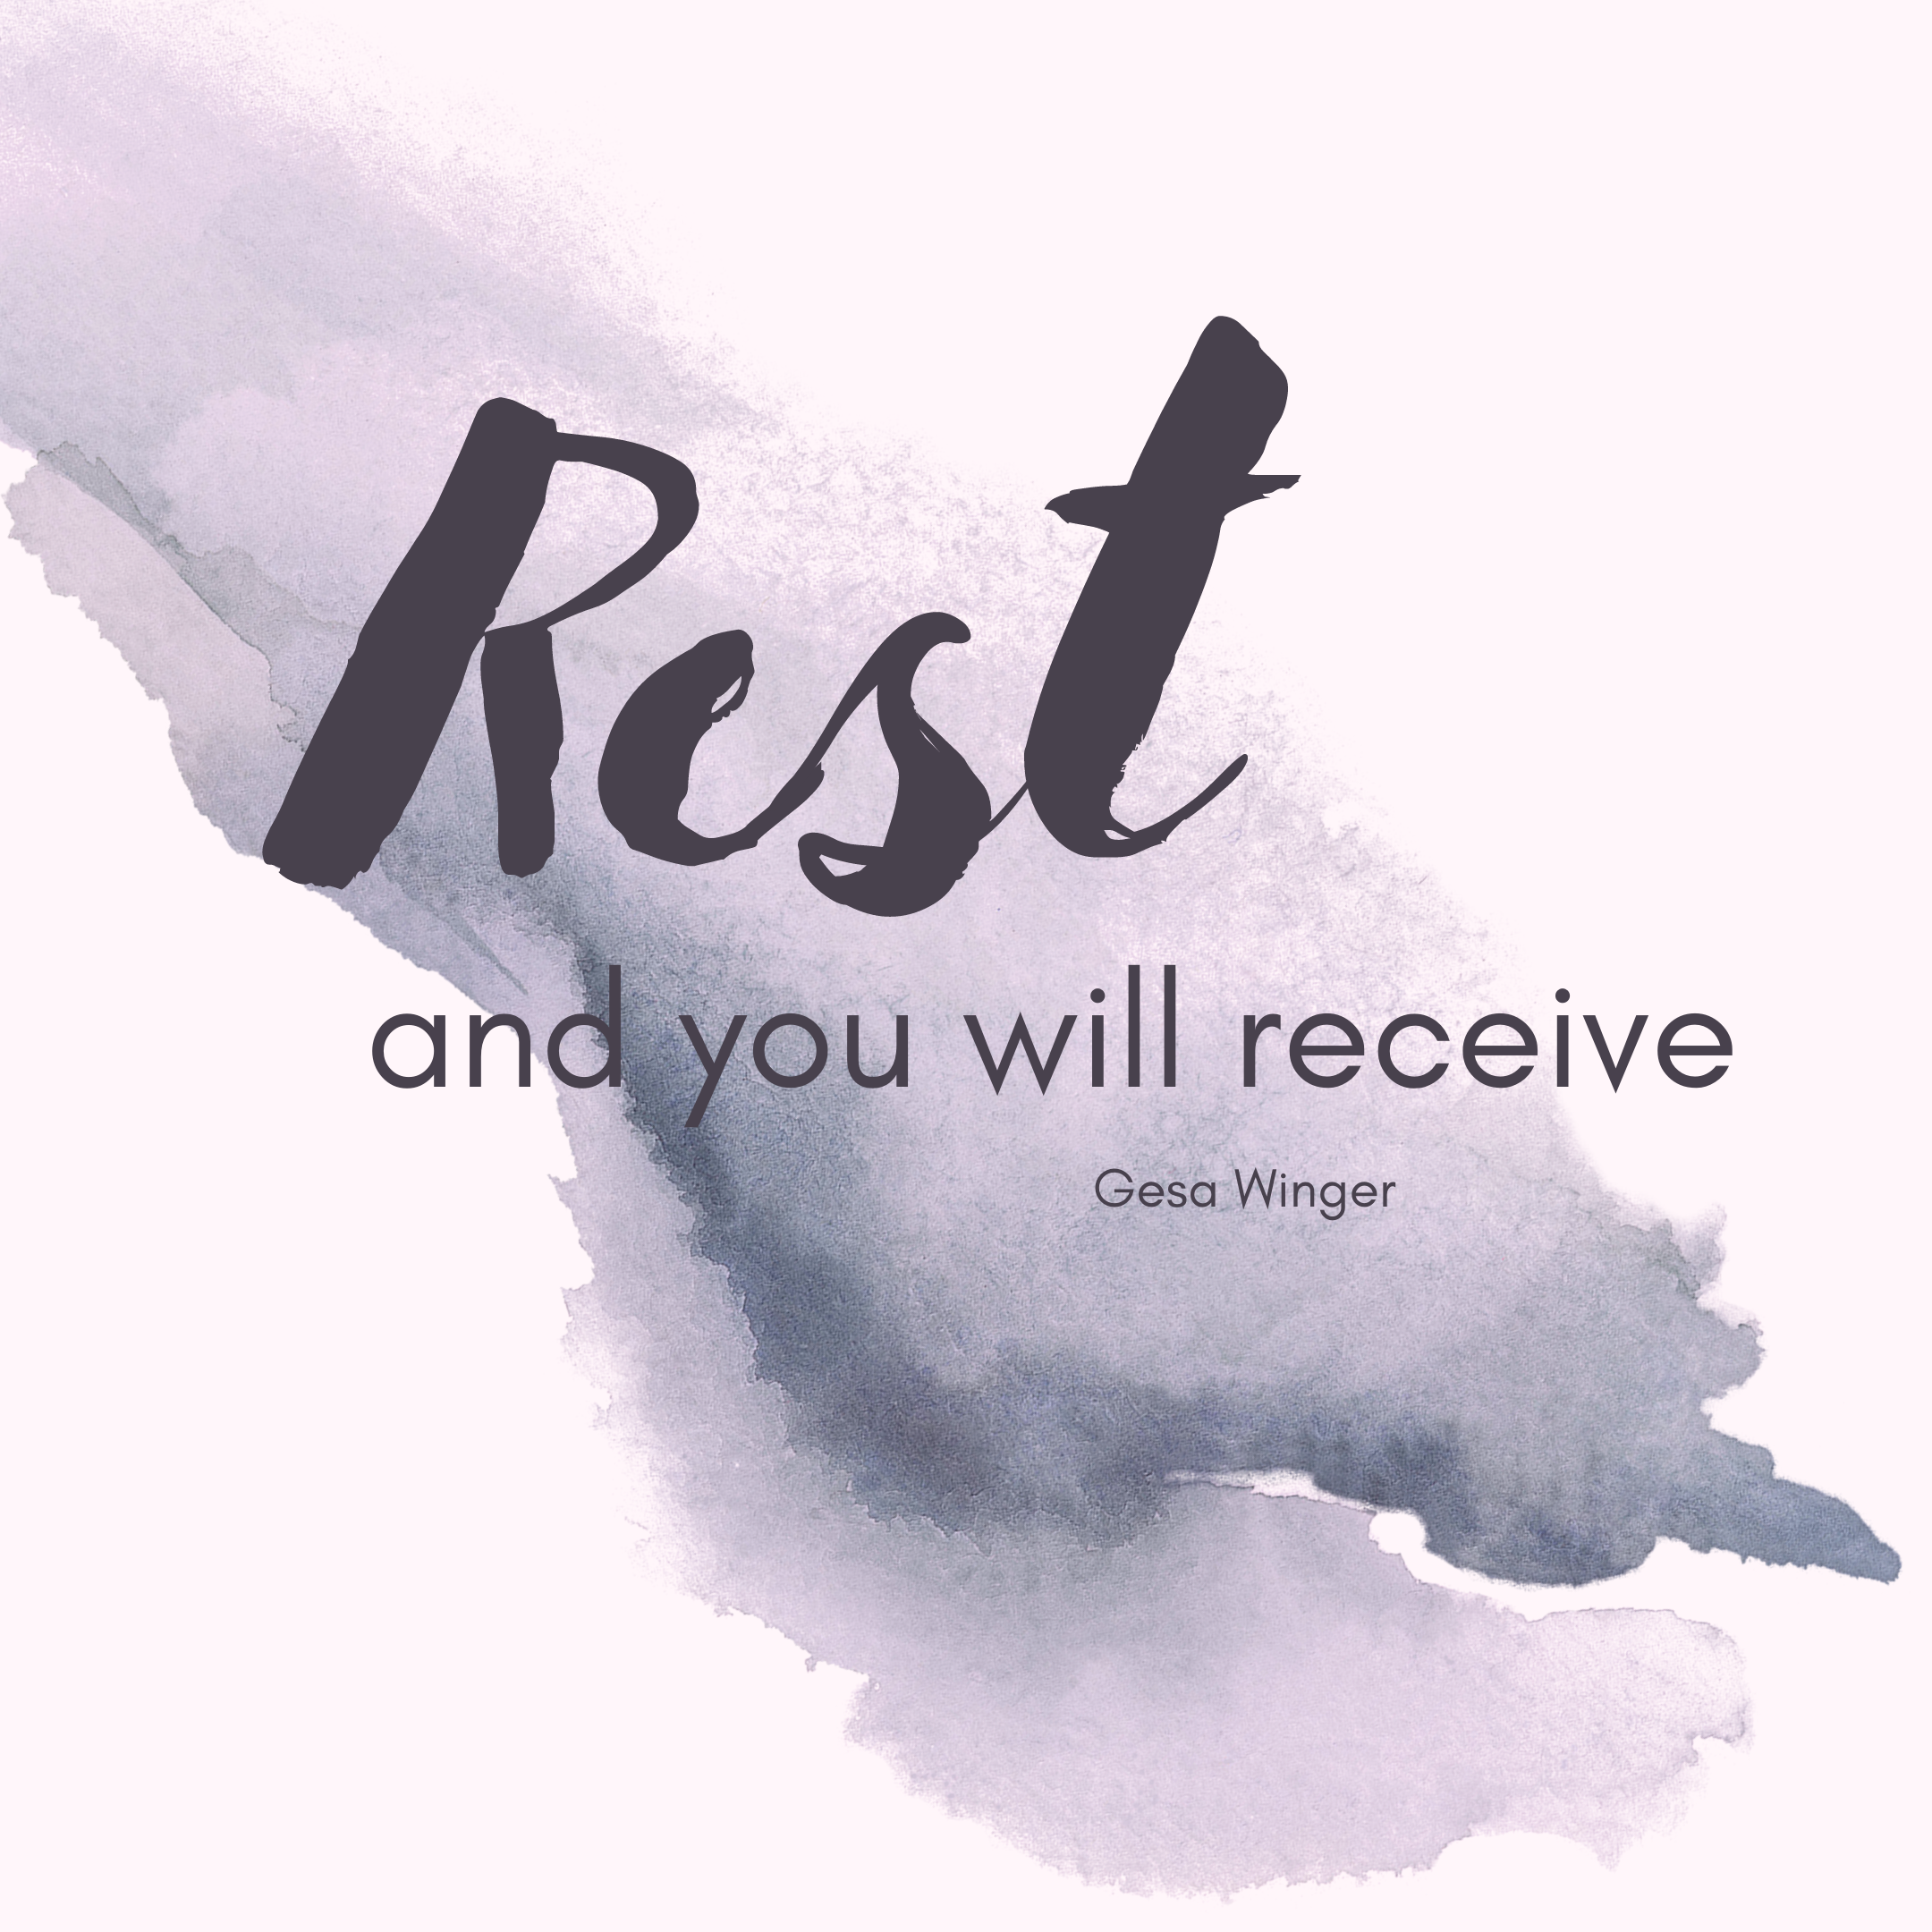 REST and you will receive